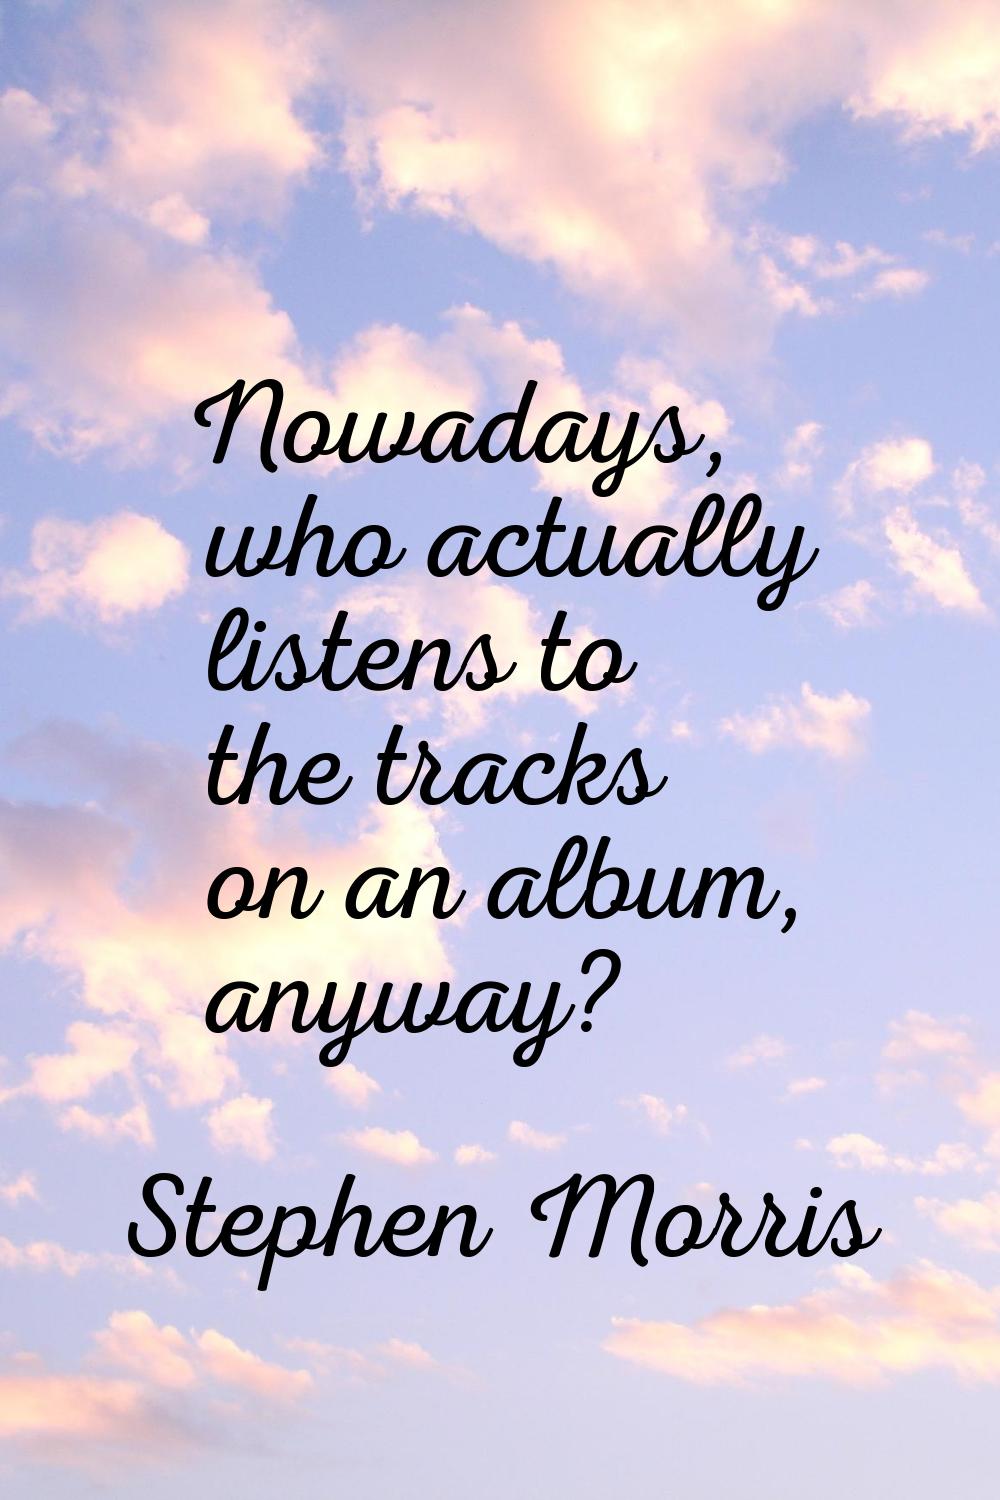 Nowadays, who actually listens to the tracks on an album, anyway?